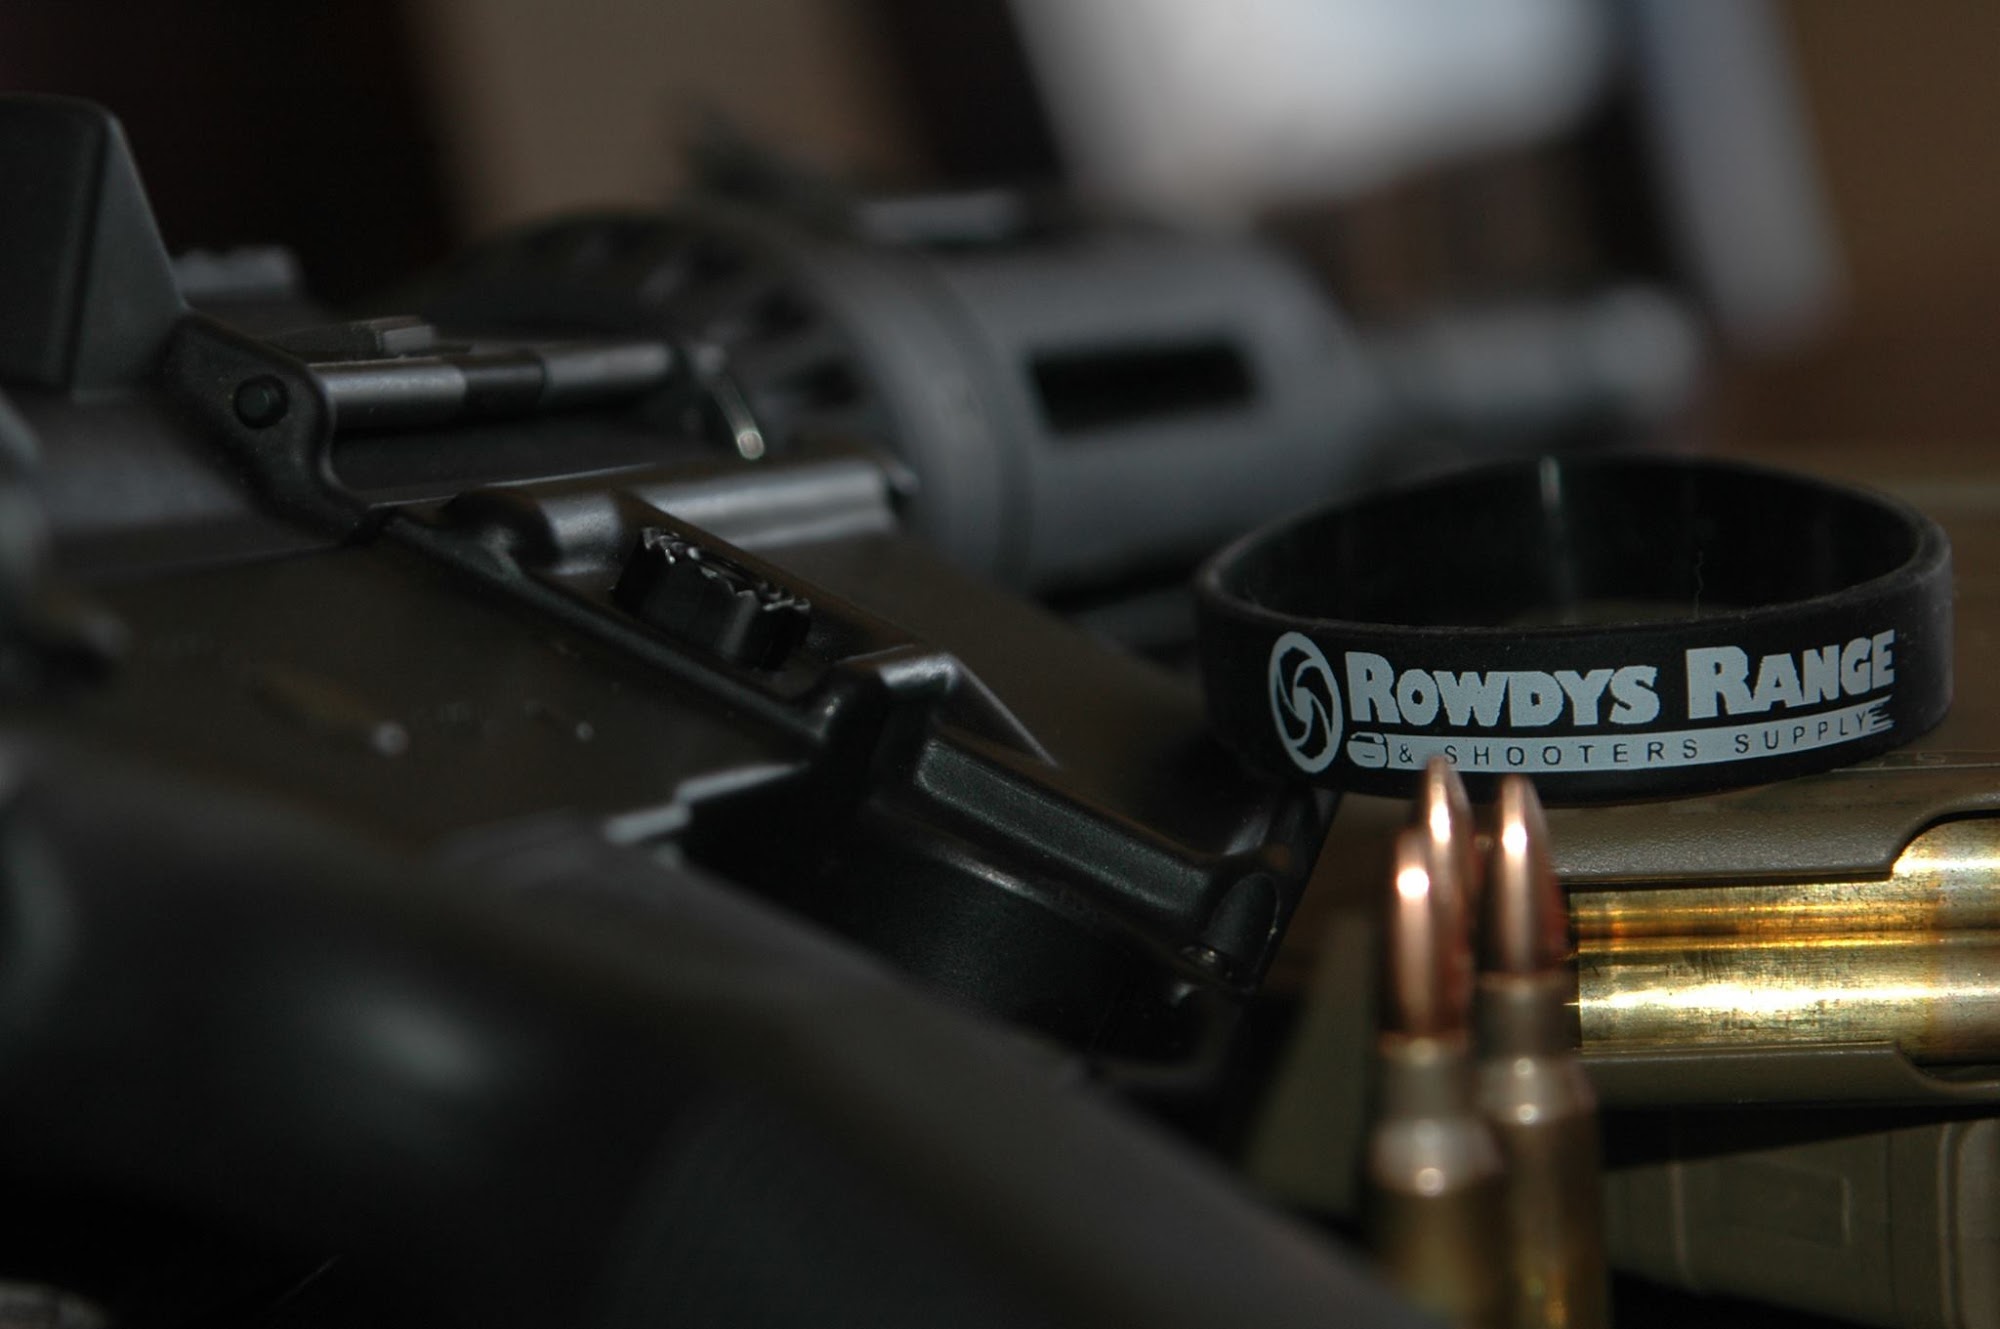 Rowdy's Range and Shooters Supply